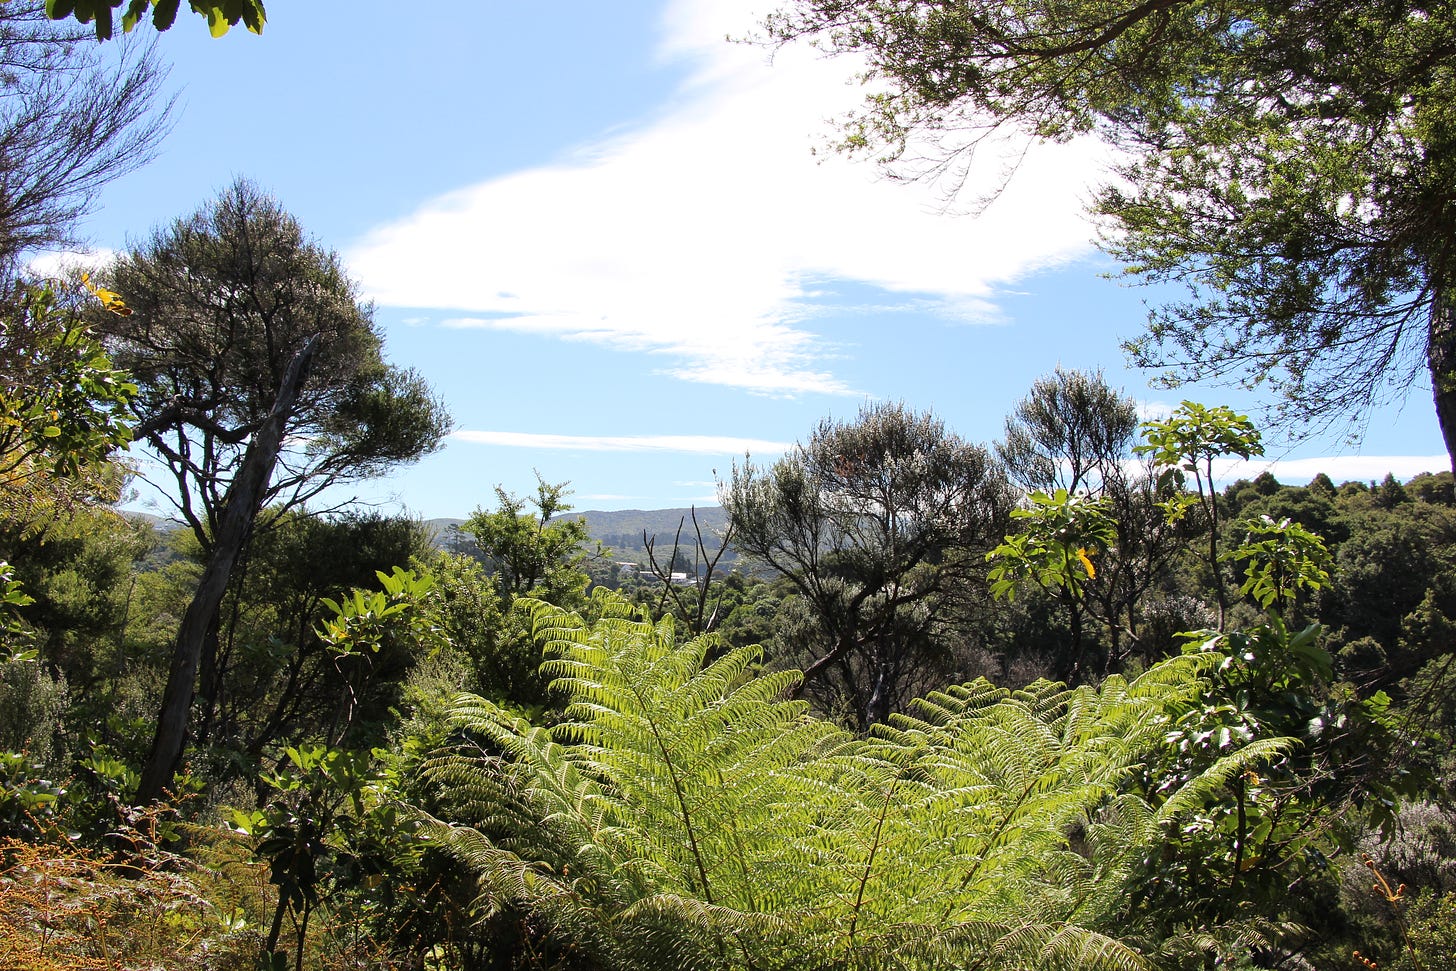 view from the top of a hill with blue skies, ferns in the forground and hills further away